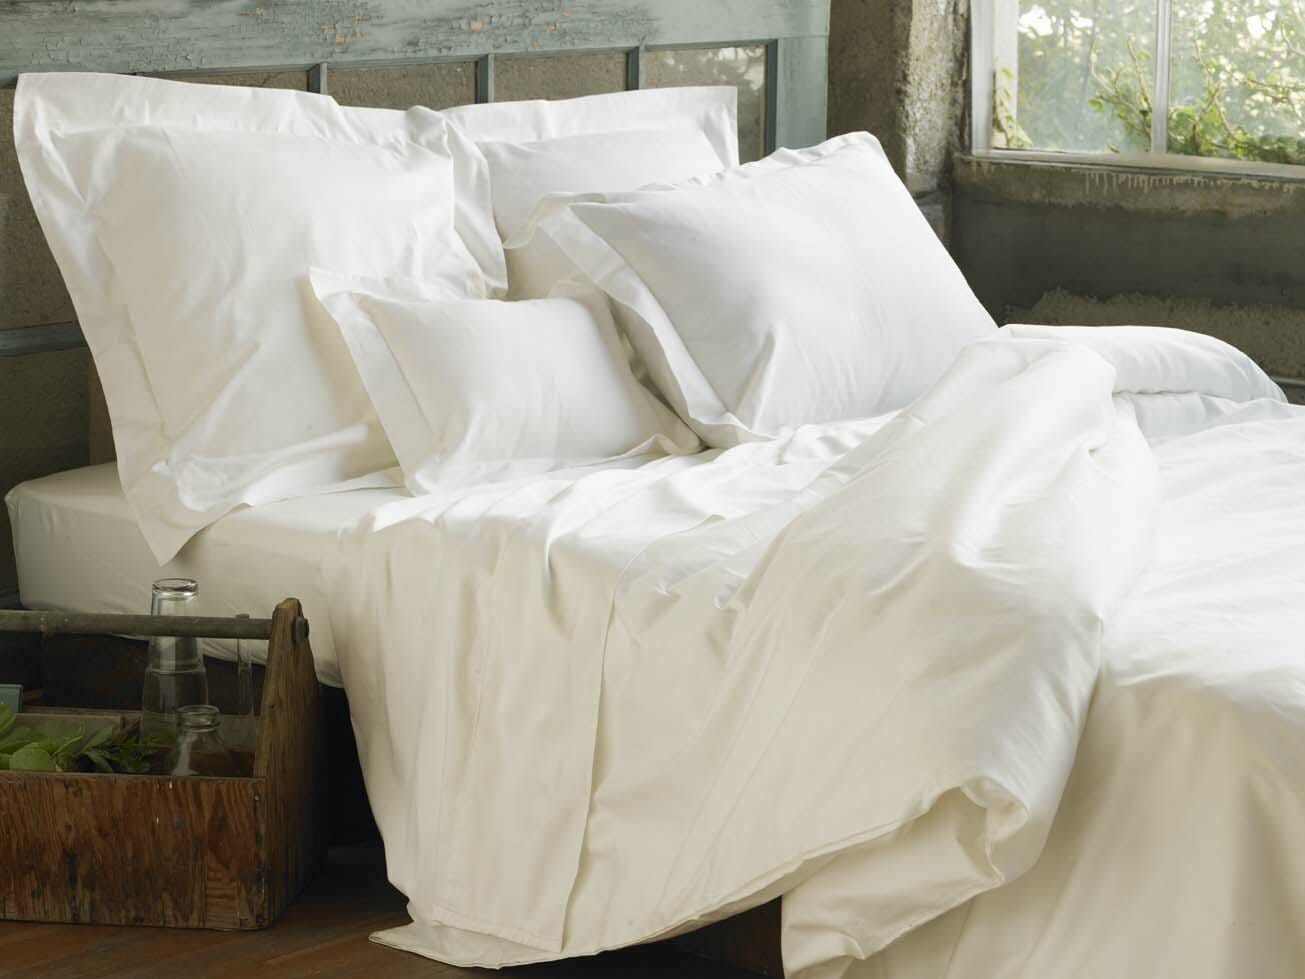 wapt image post 1 - The Importance of a Good Thread Count For Bedding